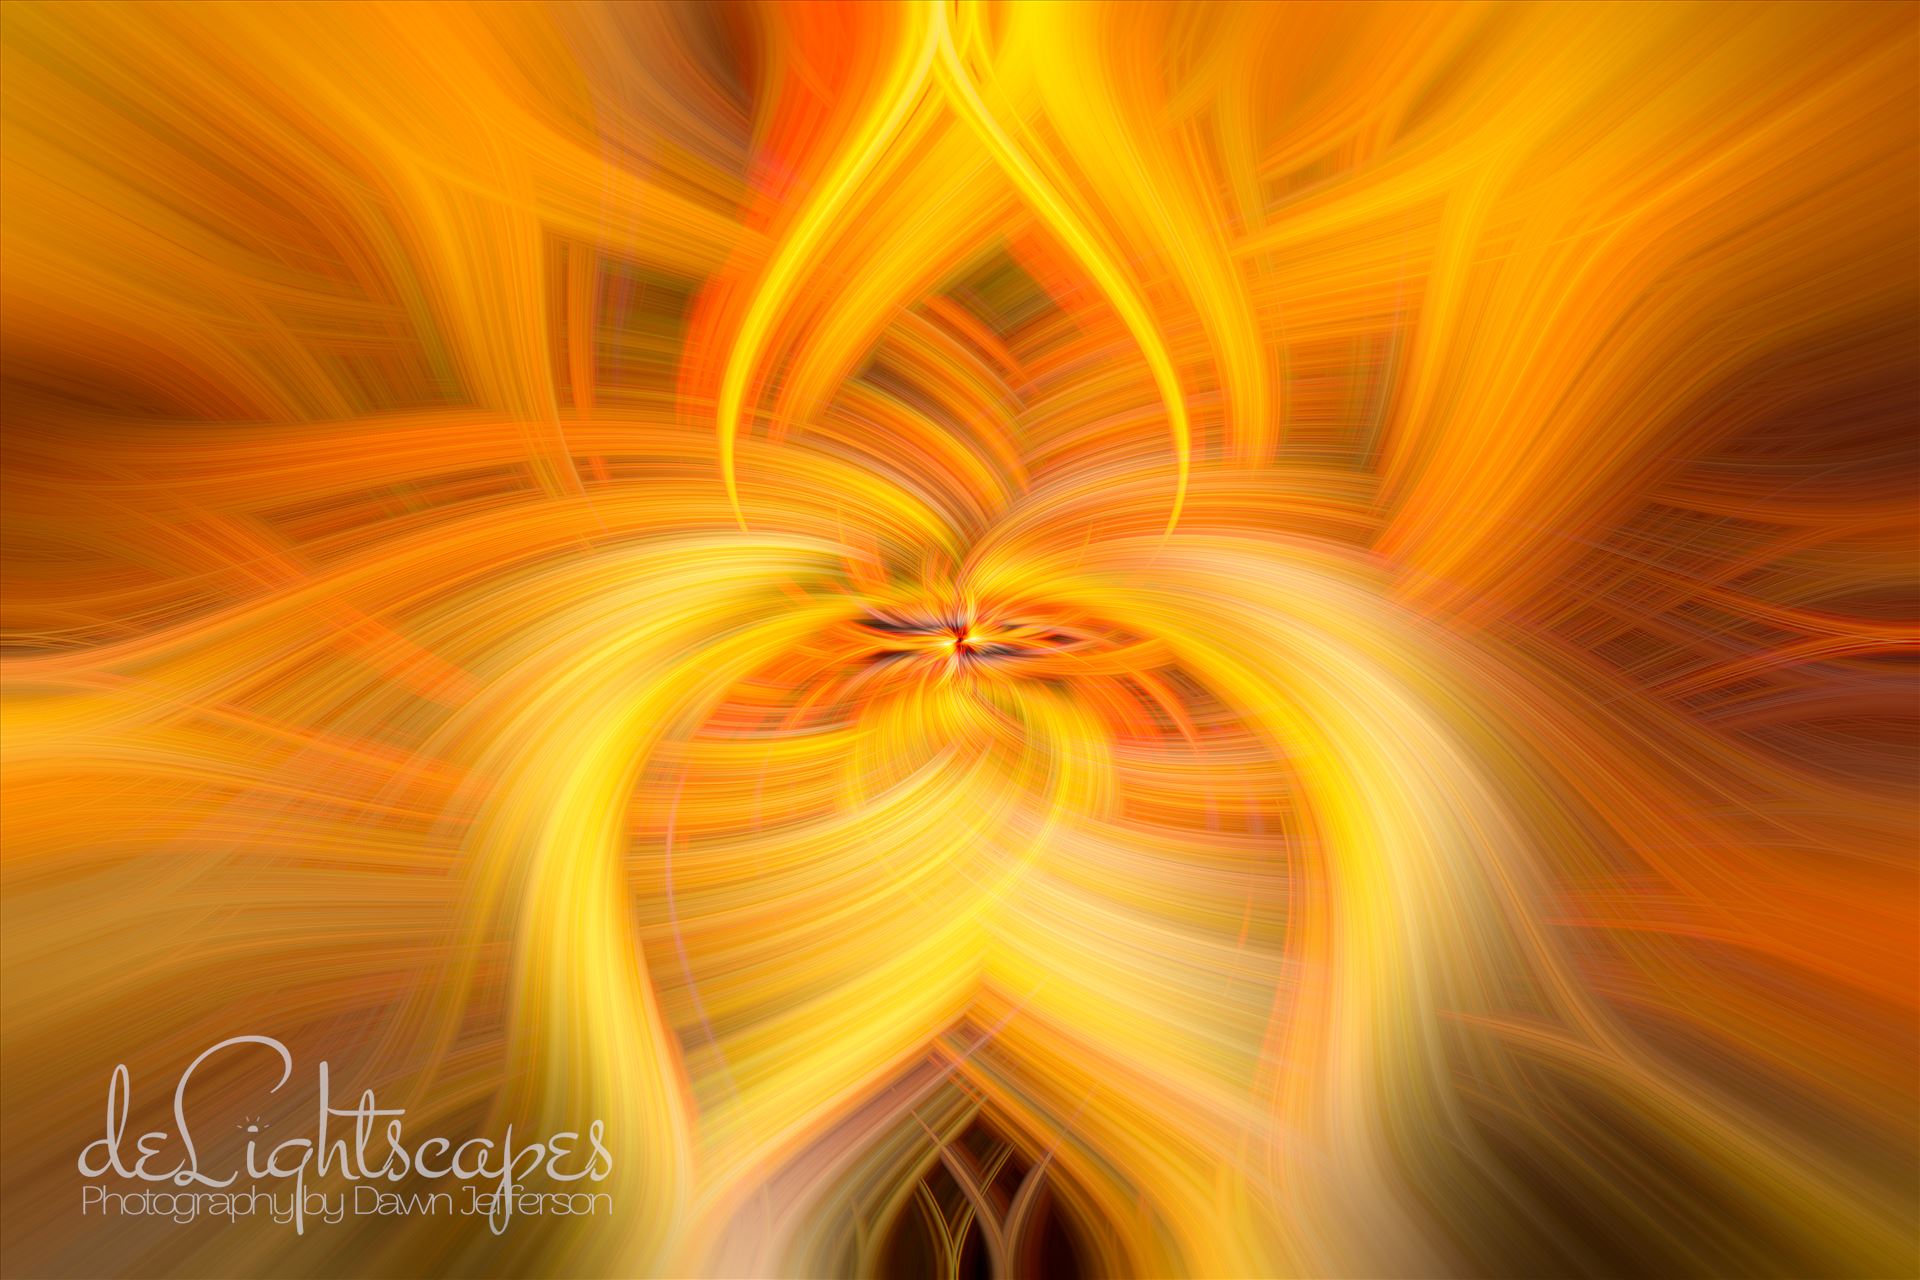 Twirled A landscape image "twirled" in photoshop to create an abstract image by Dawn Jefferson